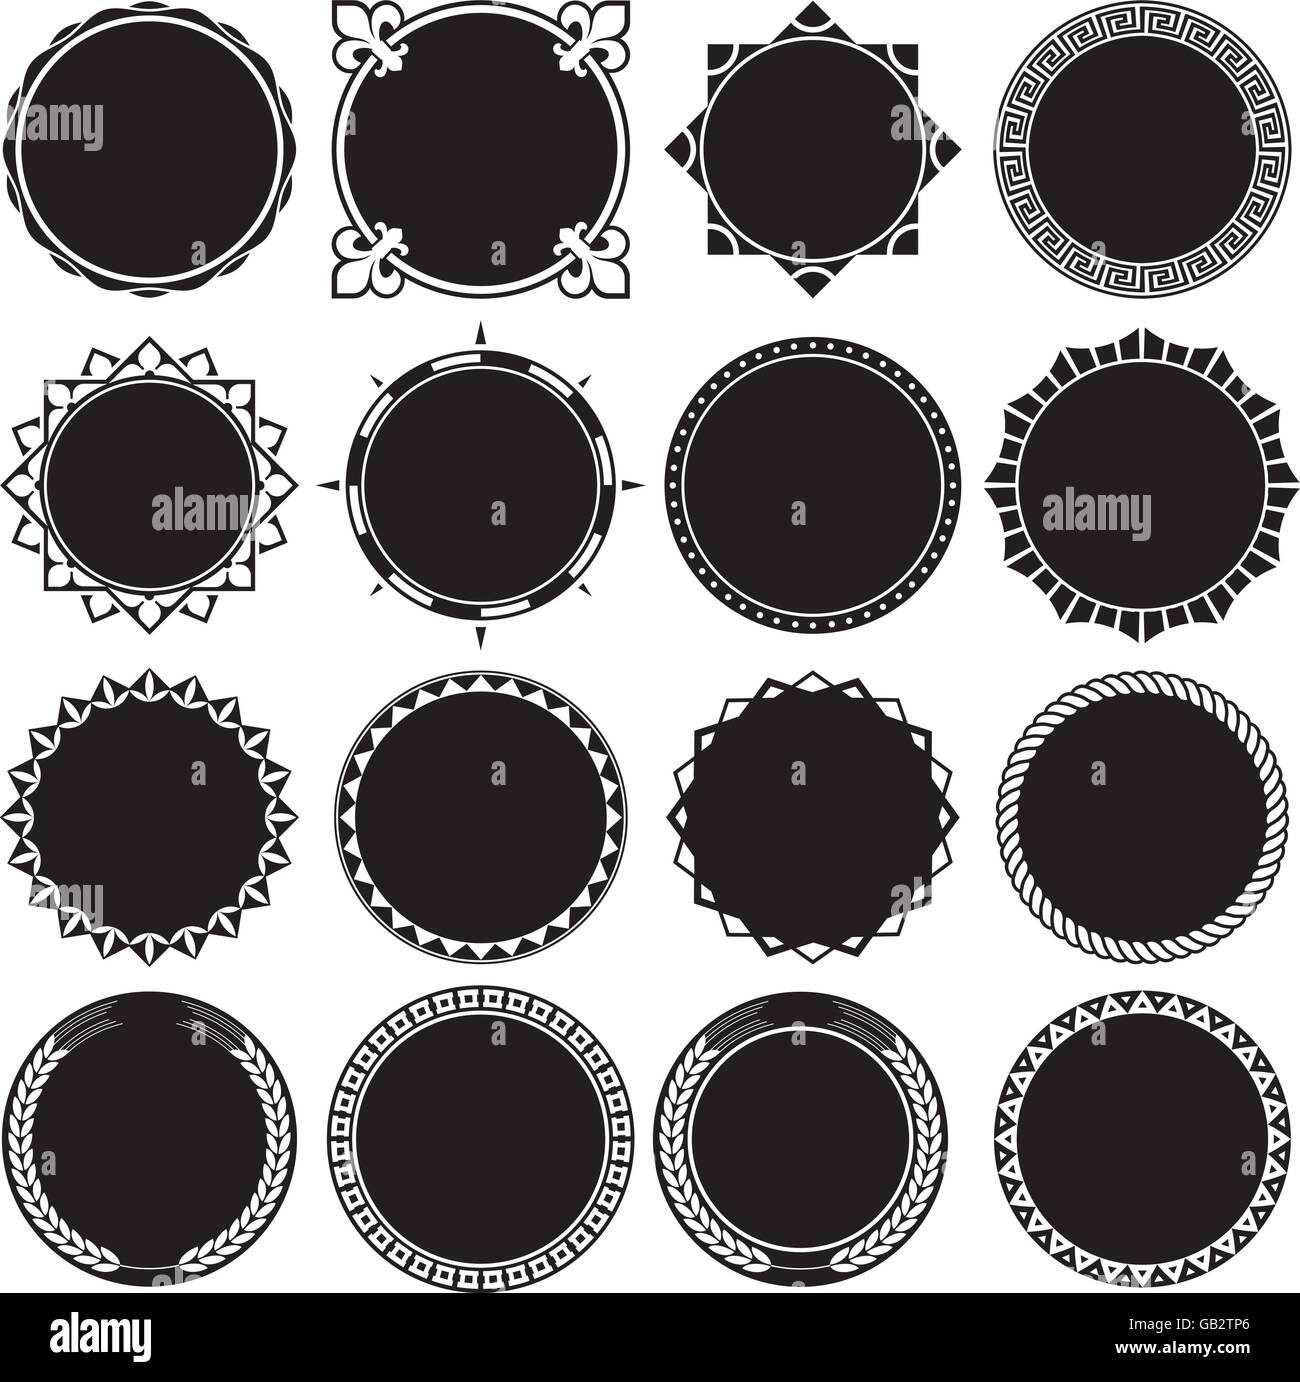 Collection of Round Decorative Border Frames. Ideal for vintage label designs. Stock Vector